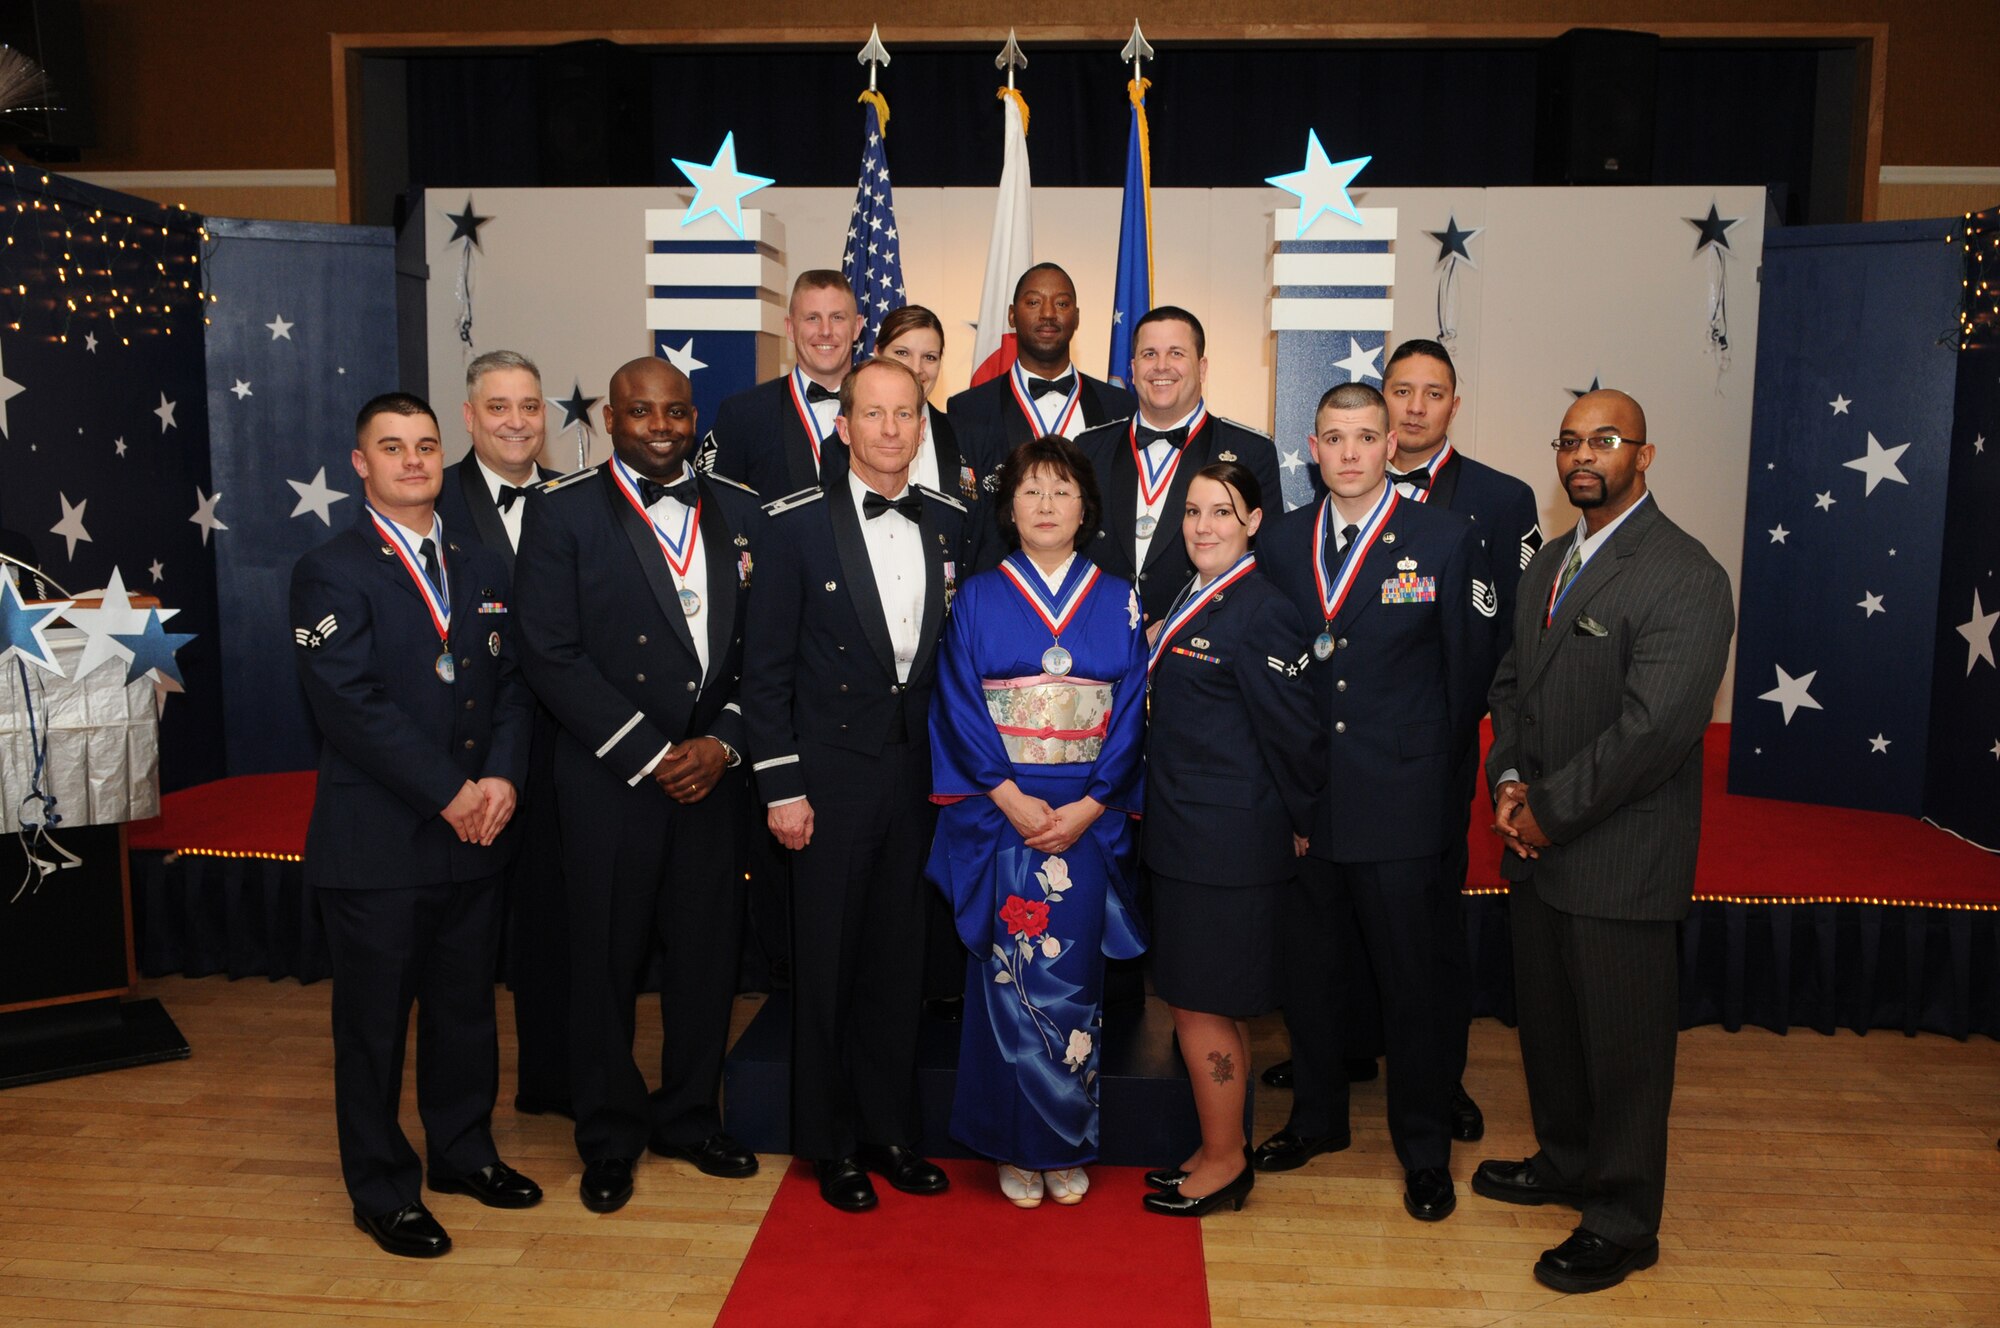 MISAWA AIR BASE, Japan -- Misawa Air Base recognizes its annual award winners Jan. 23, 2009.  More than 400 people attended the ceremony that recognized 45 individual nominees. (U.S. Air Force photo by Senior Airman Jamal D. Sutter)